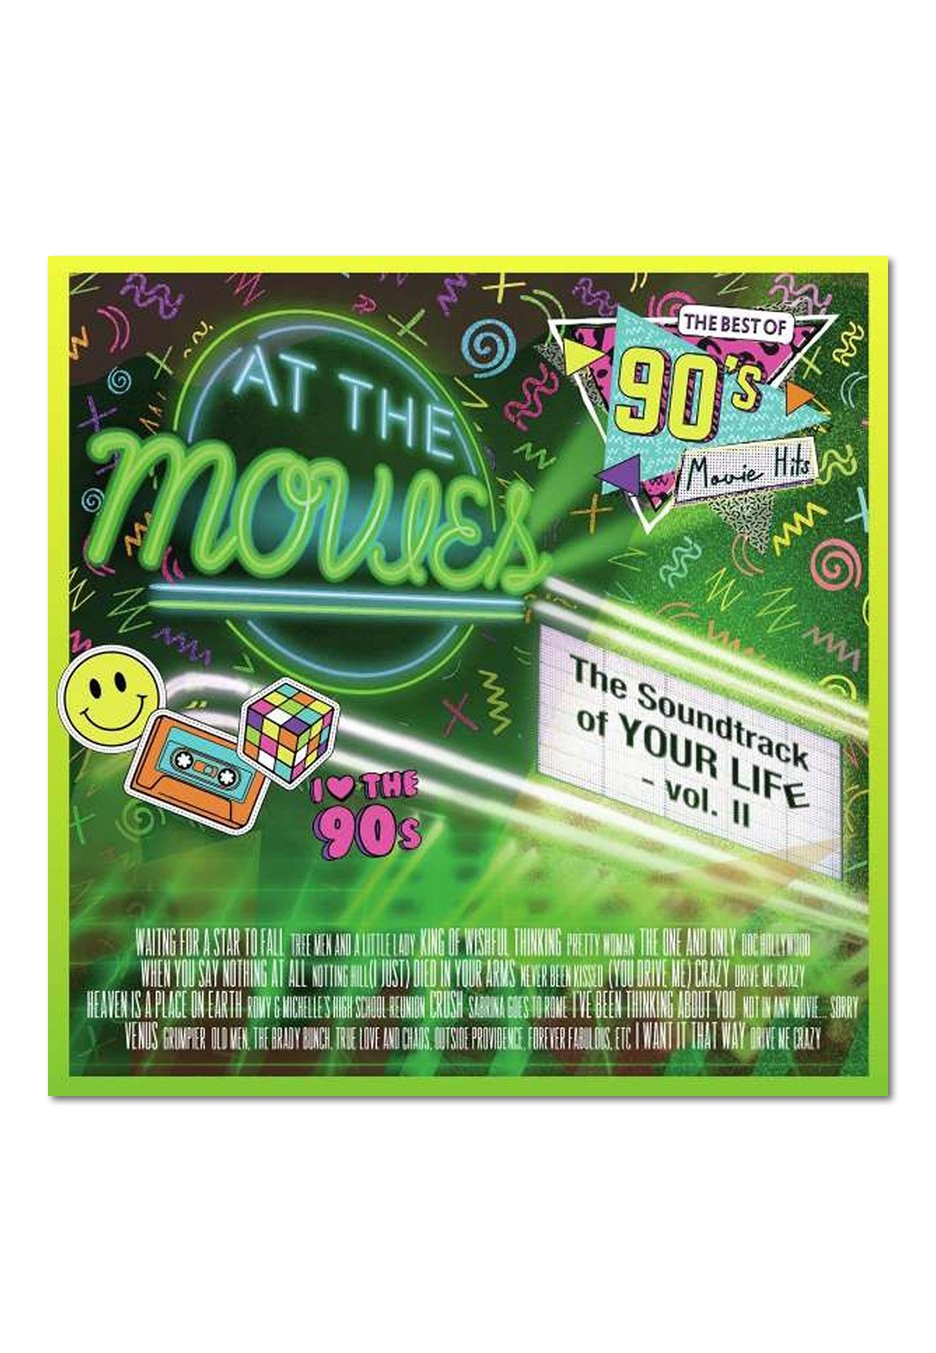 At The Movies - Soundtrack Of Your Life Vol. 2 - CD + DVD